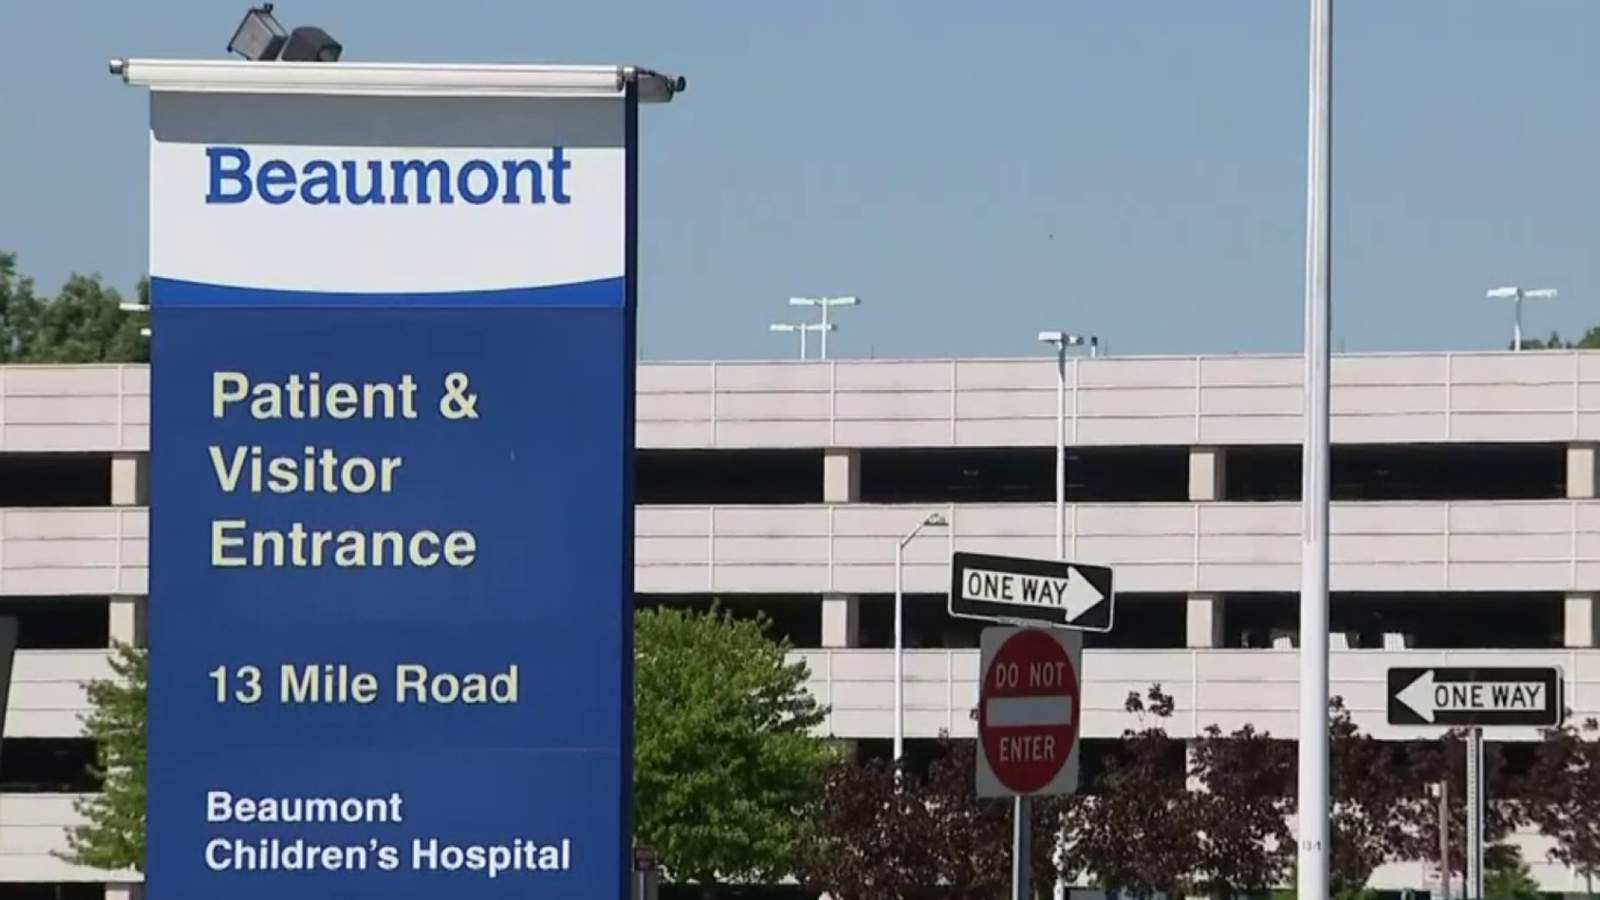 What the potential Beaumont-Advocate Aurora merger could mean for patients, employees